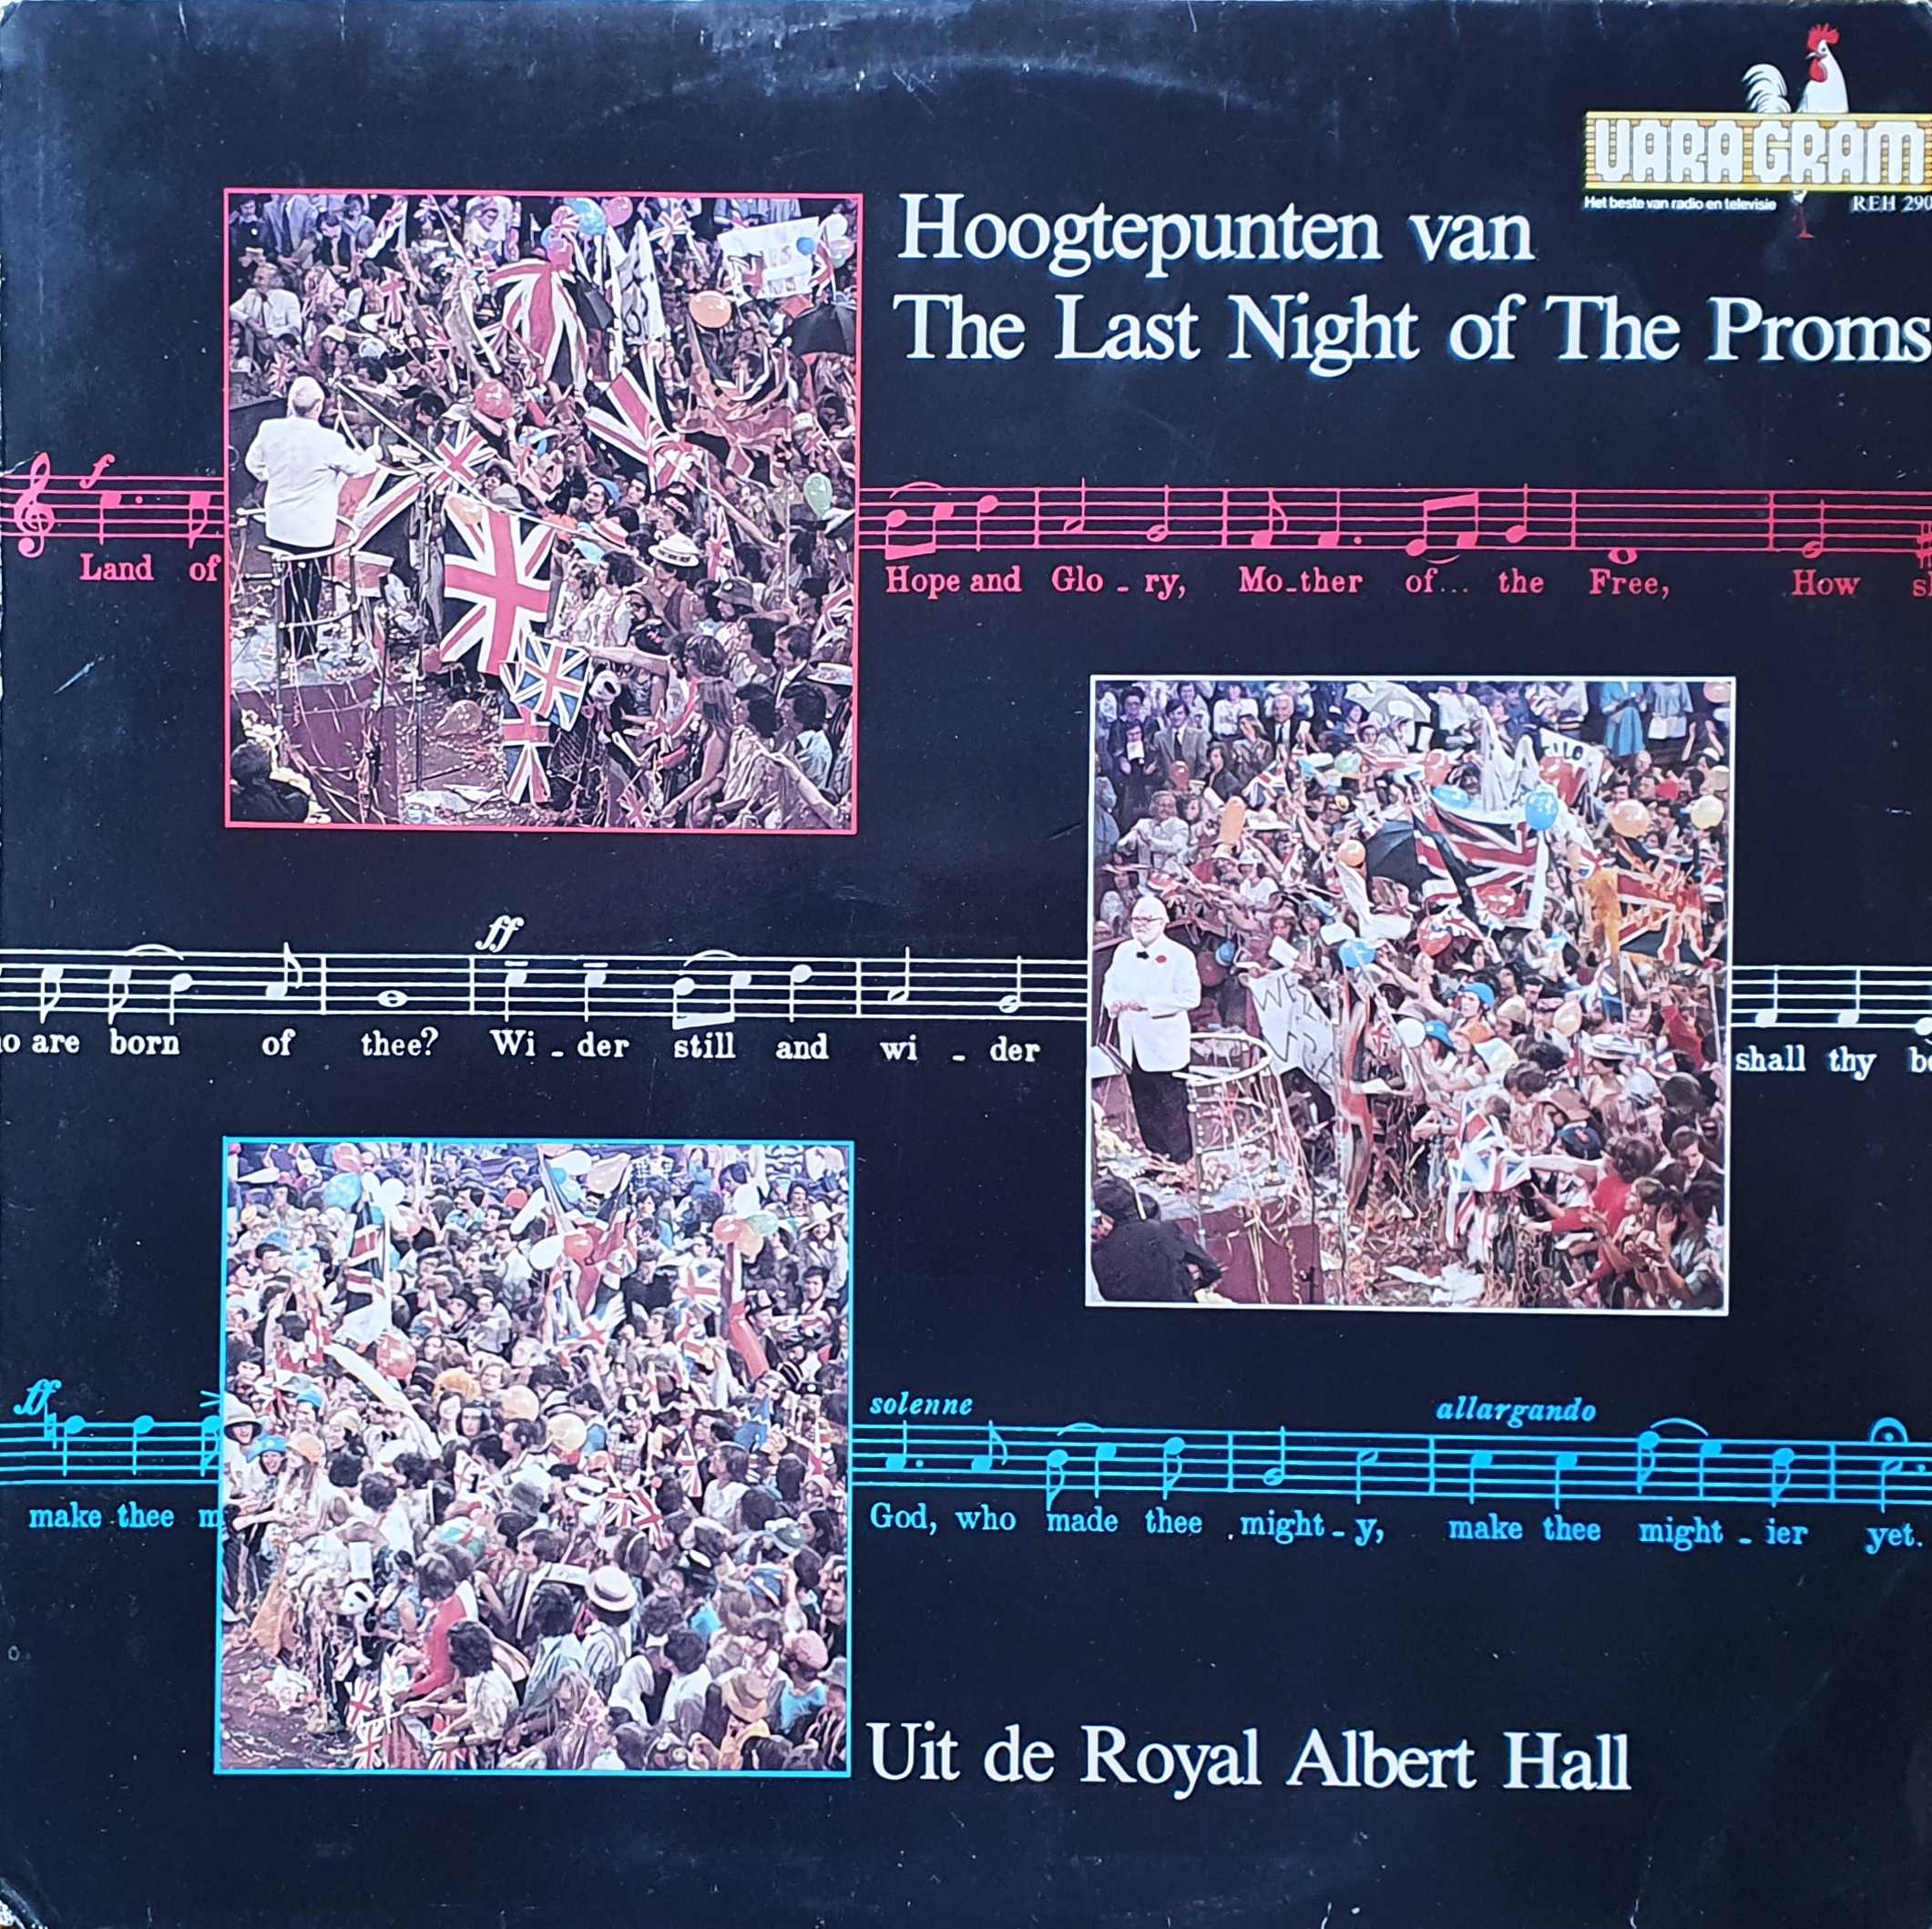 Picture of REH 290-iD Hoogtepunten van the last night of The Proms by artist Various from the BBC albums - Records and Tapes library